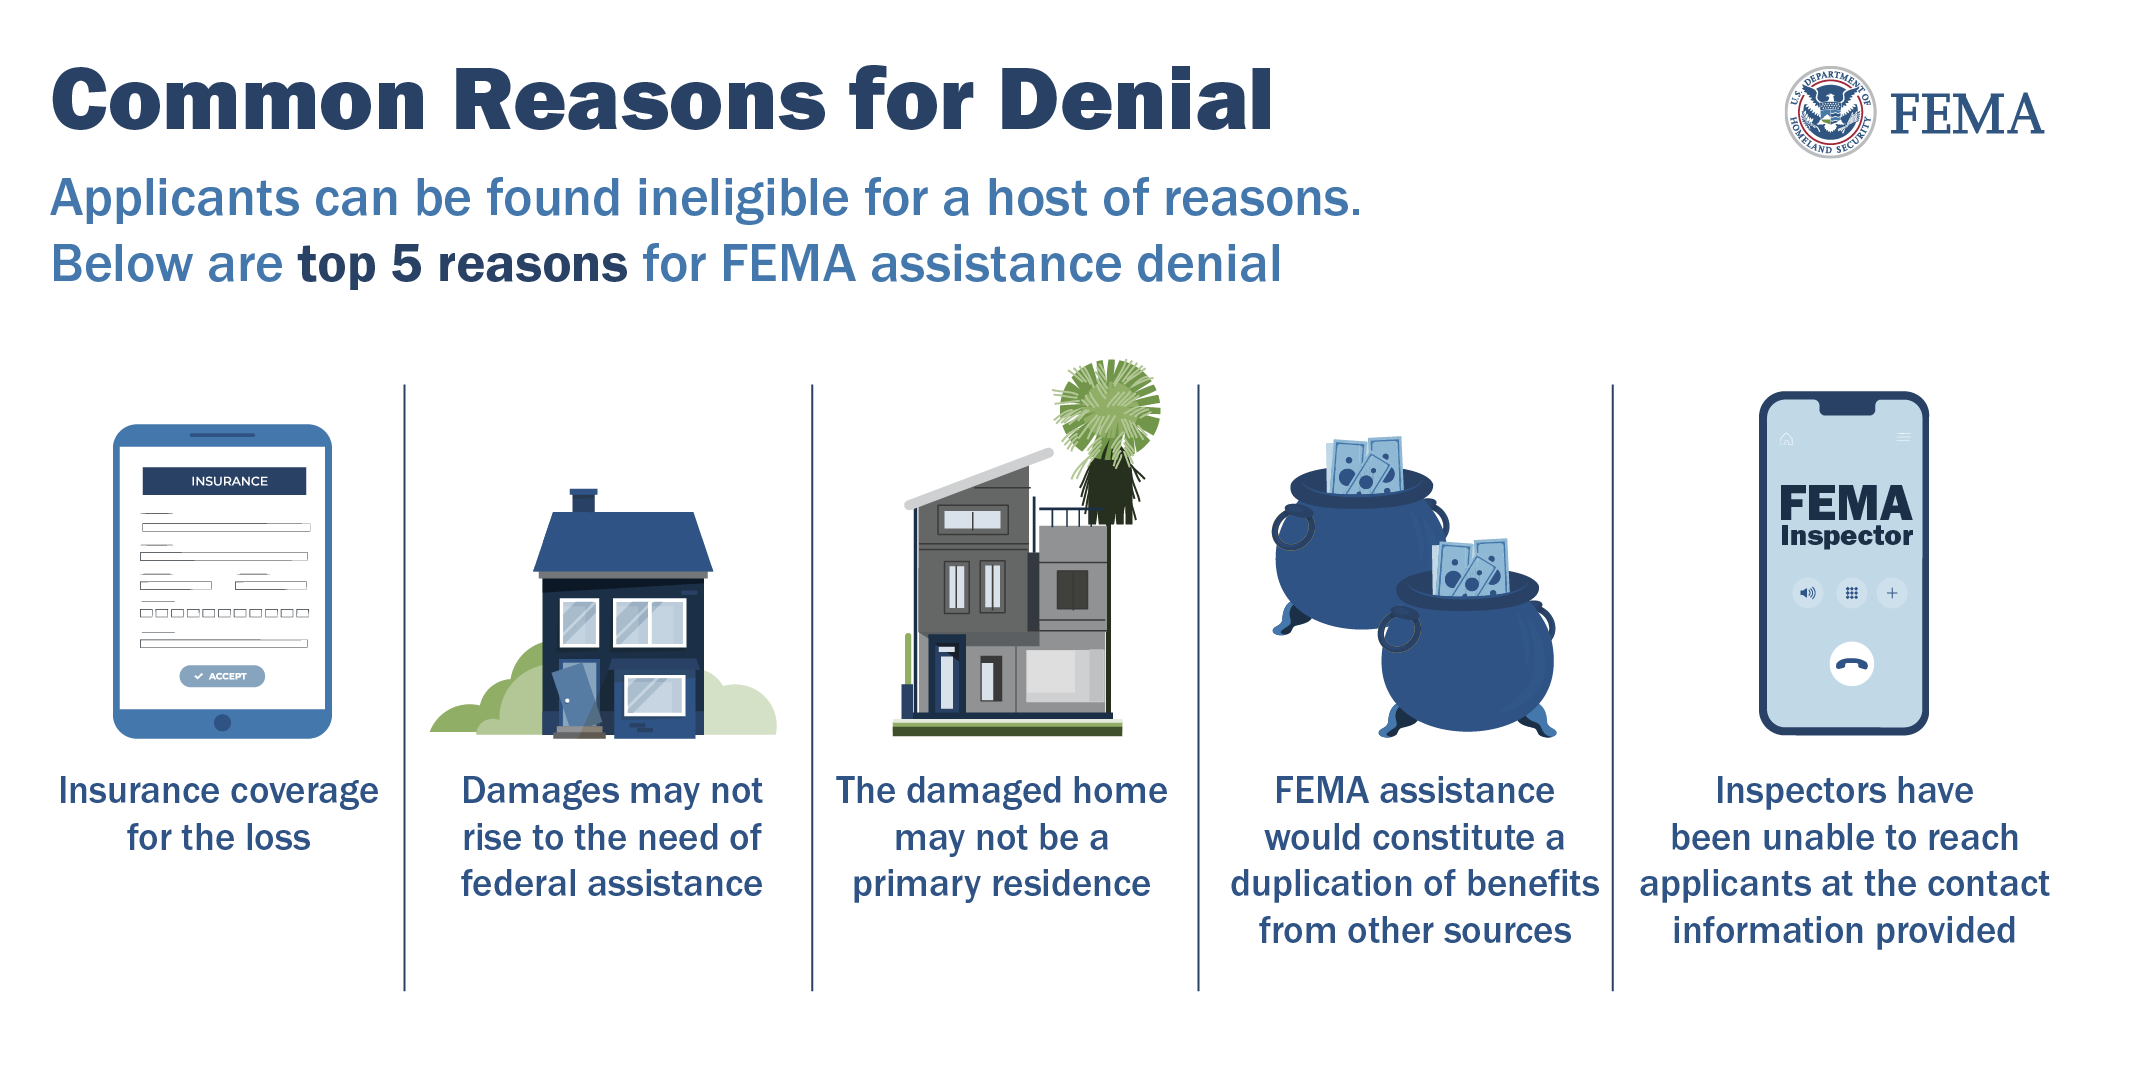 Common Reasons for Denial Graphic File